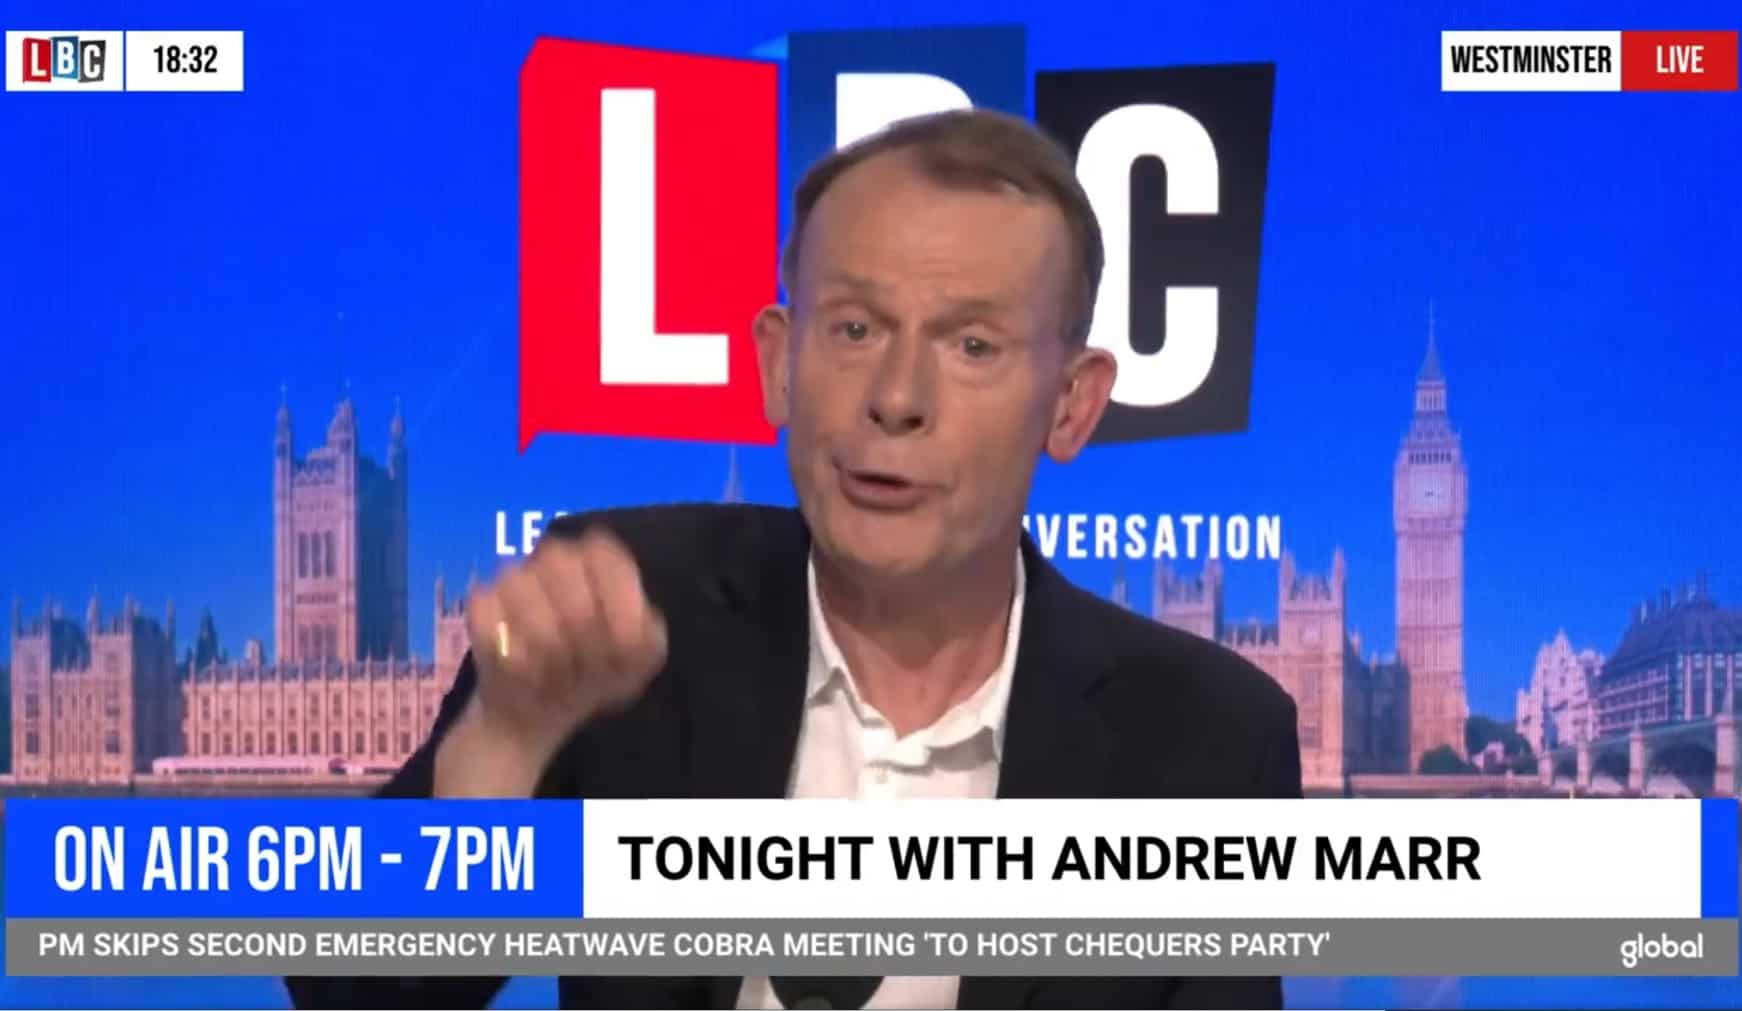 Andrew Marr hits out at ‘cowardly and shameful’ Truss in blistering 3 minute clip